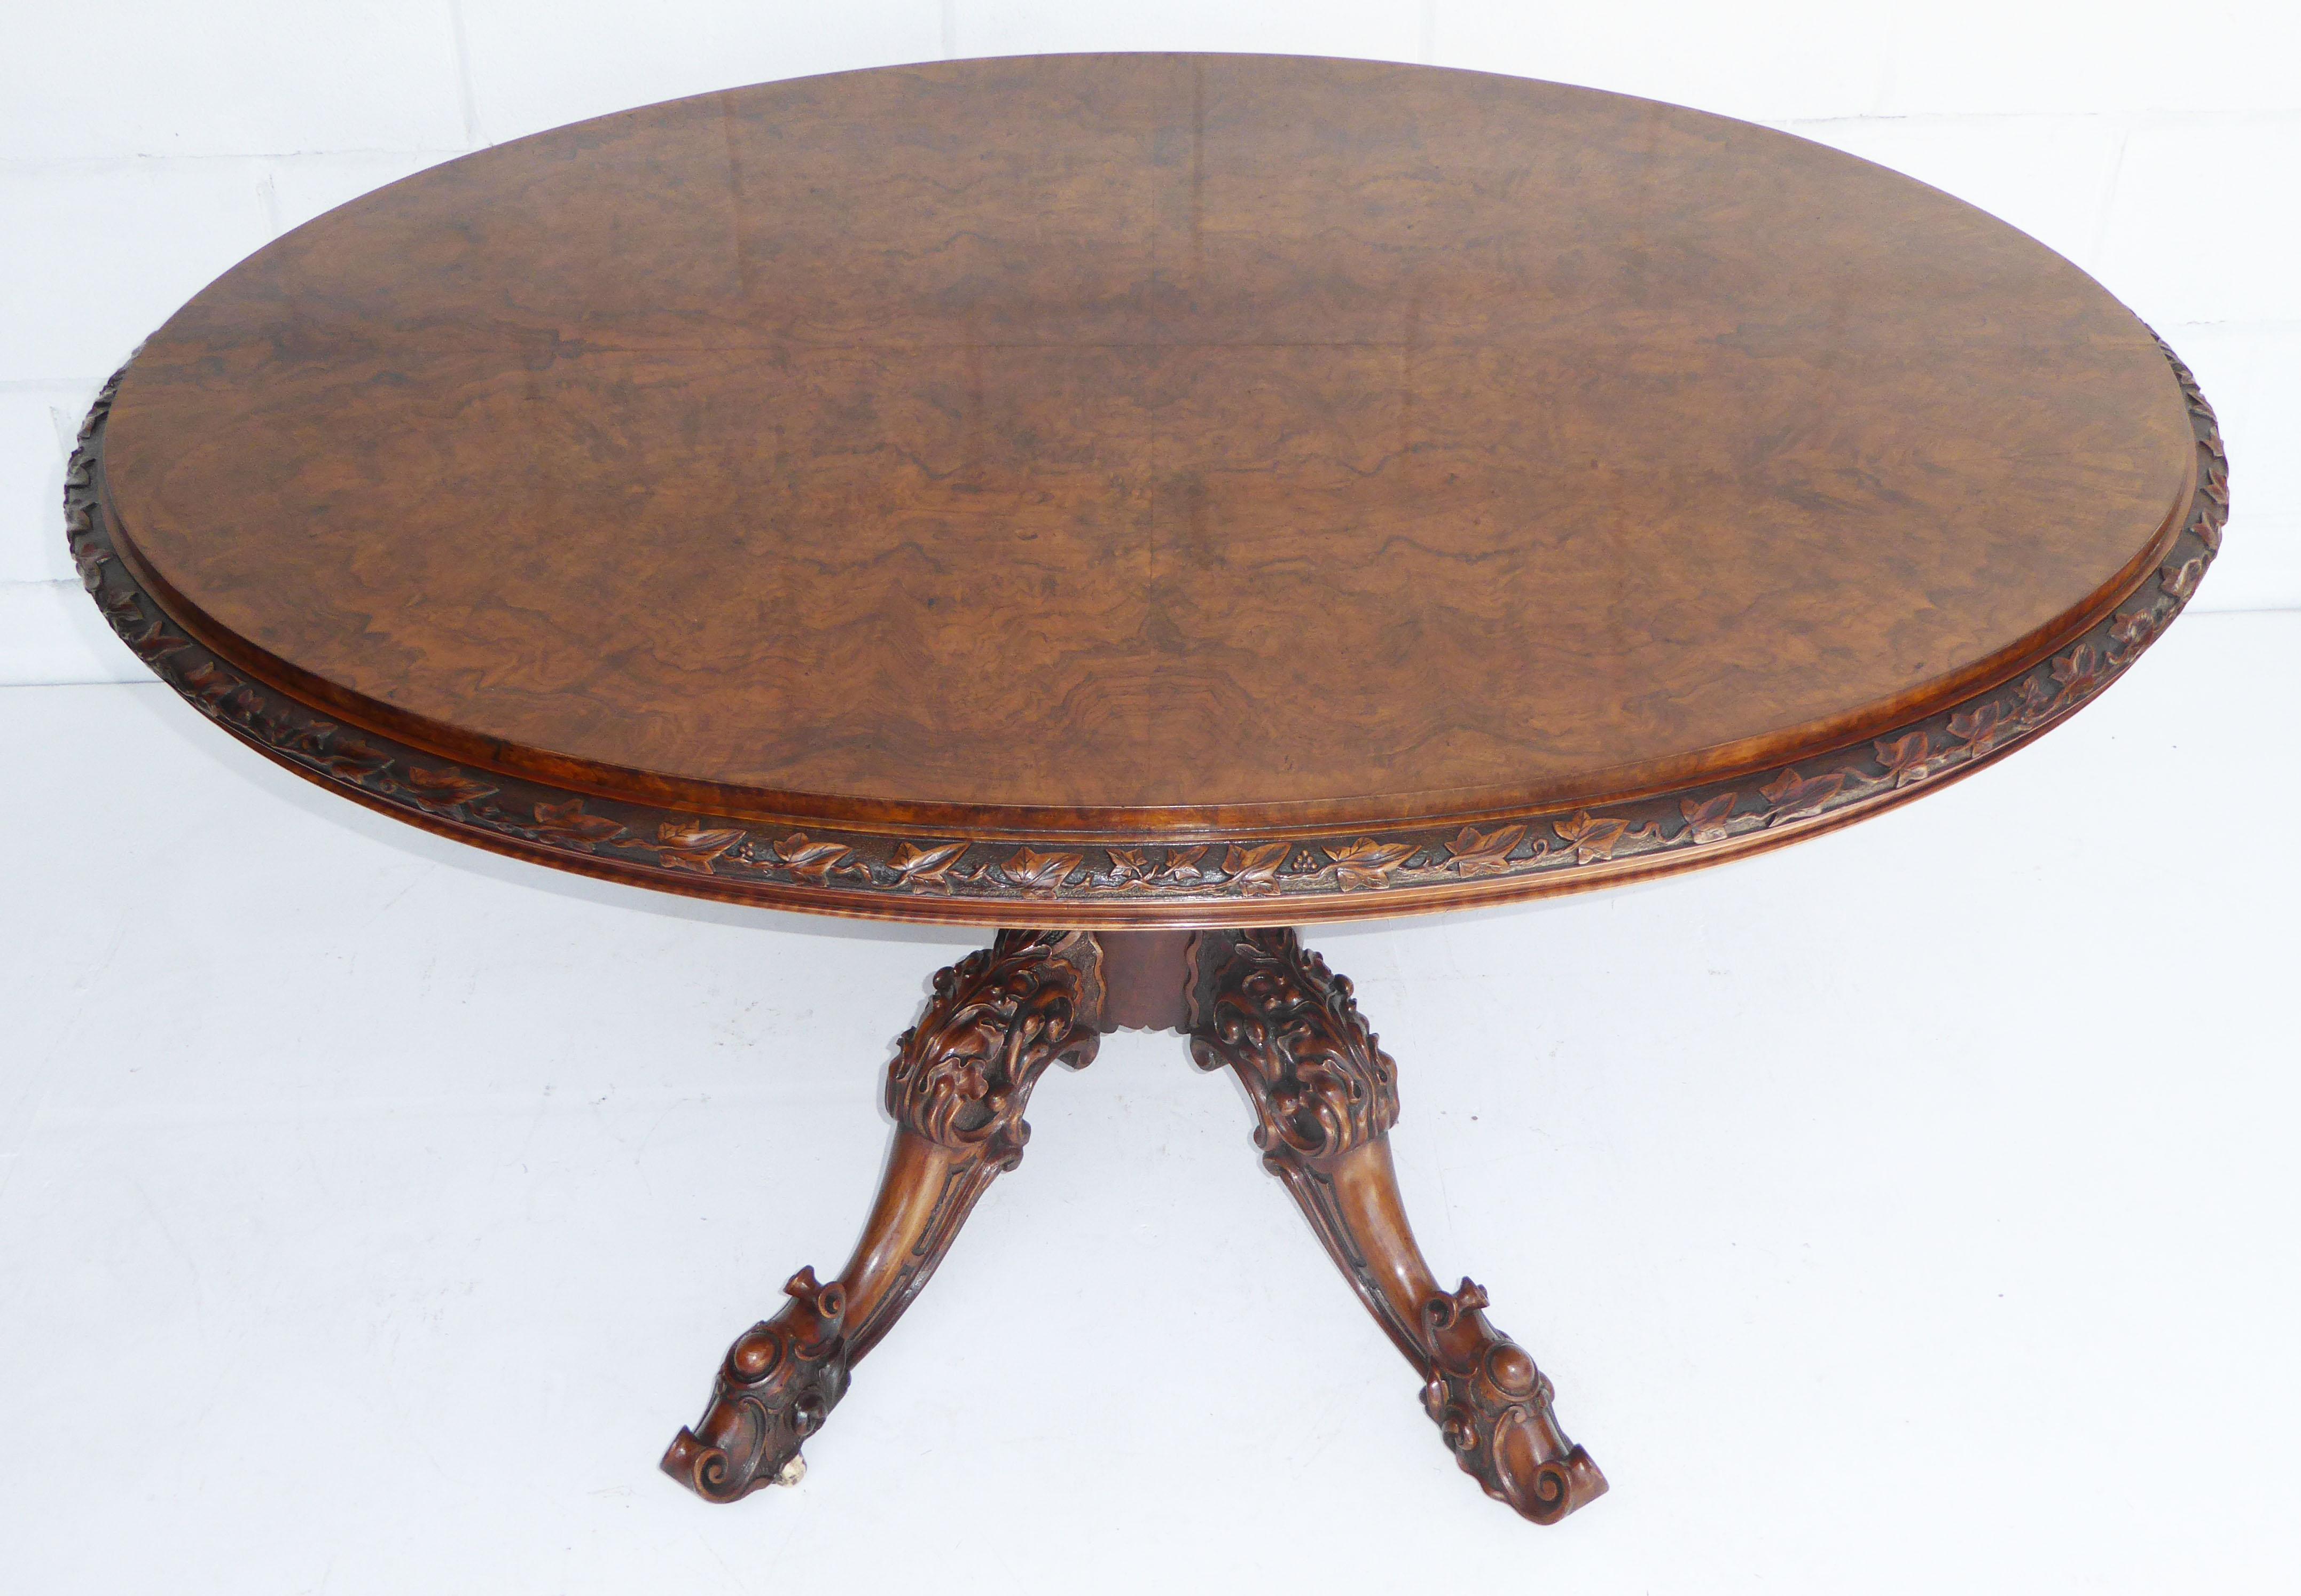 For sale is a fine quality Victorian burr walnut oval breakfast table. The edge of the table is ornately carved with ivy leaves, above an incredibly ornate turned and carved base, terminating on original castors. The table is in very good condition